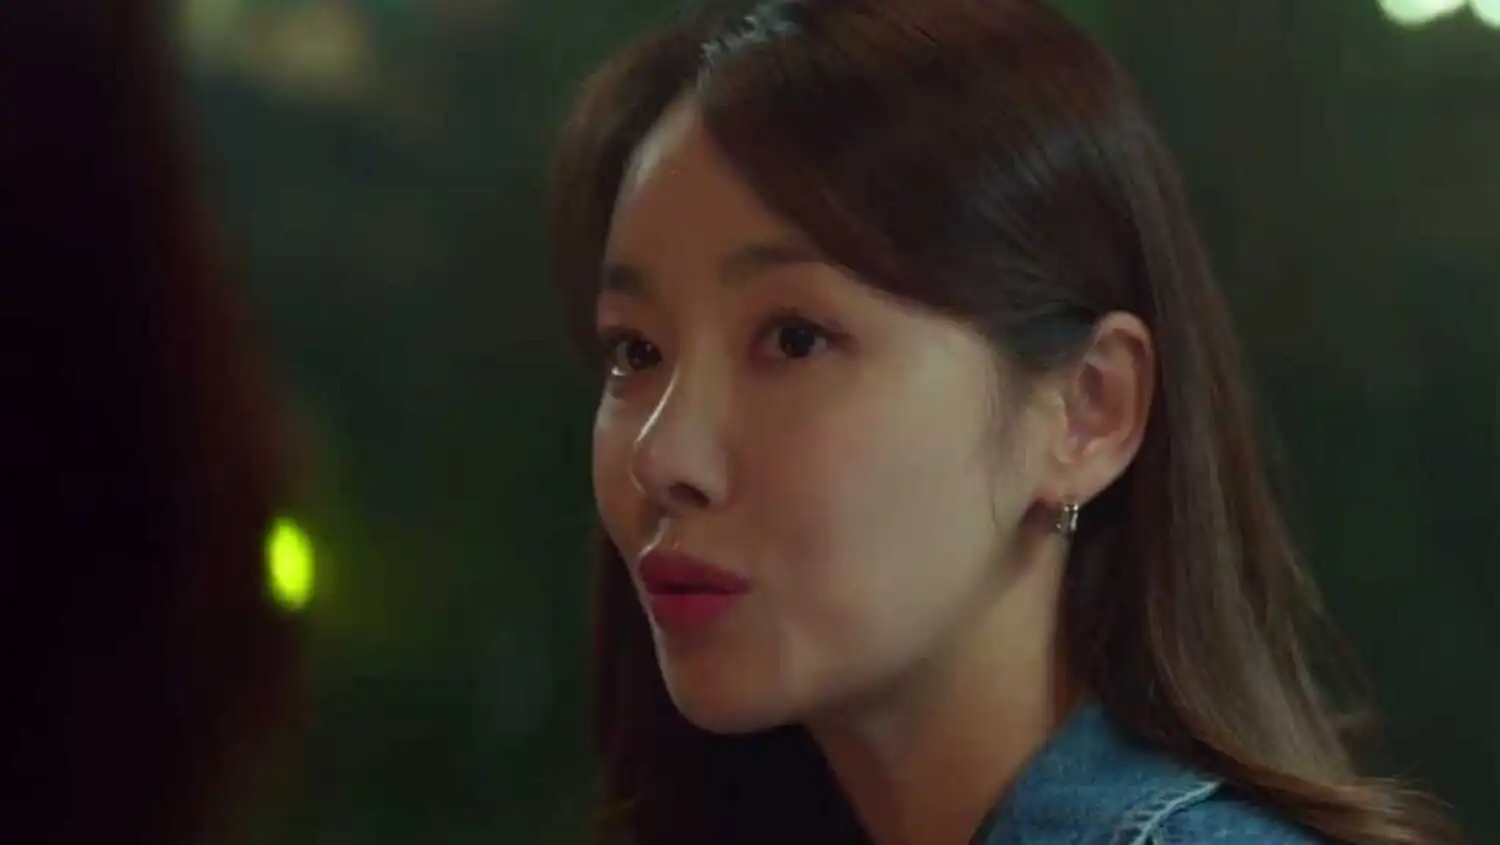 Kwon Yoon Jin In 'My Happy Ending' Actress Name - Character Explained